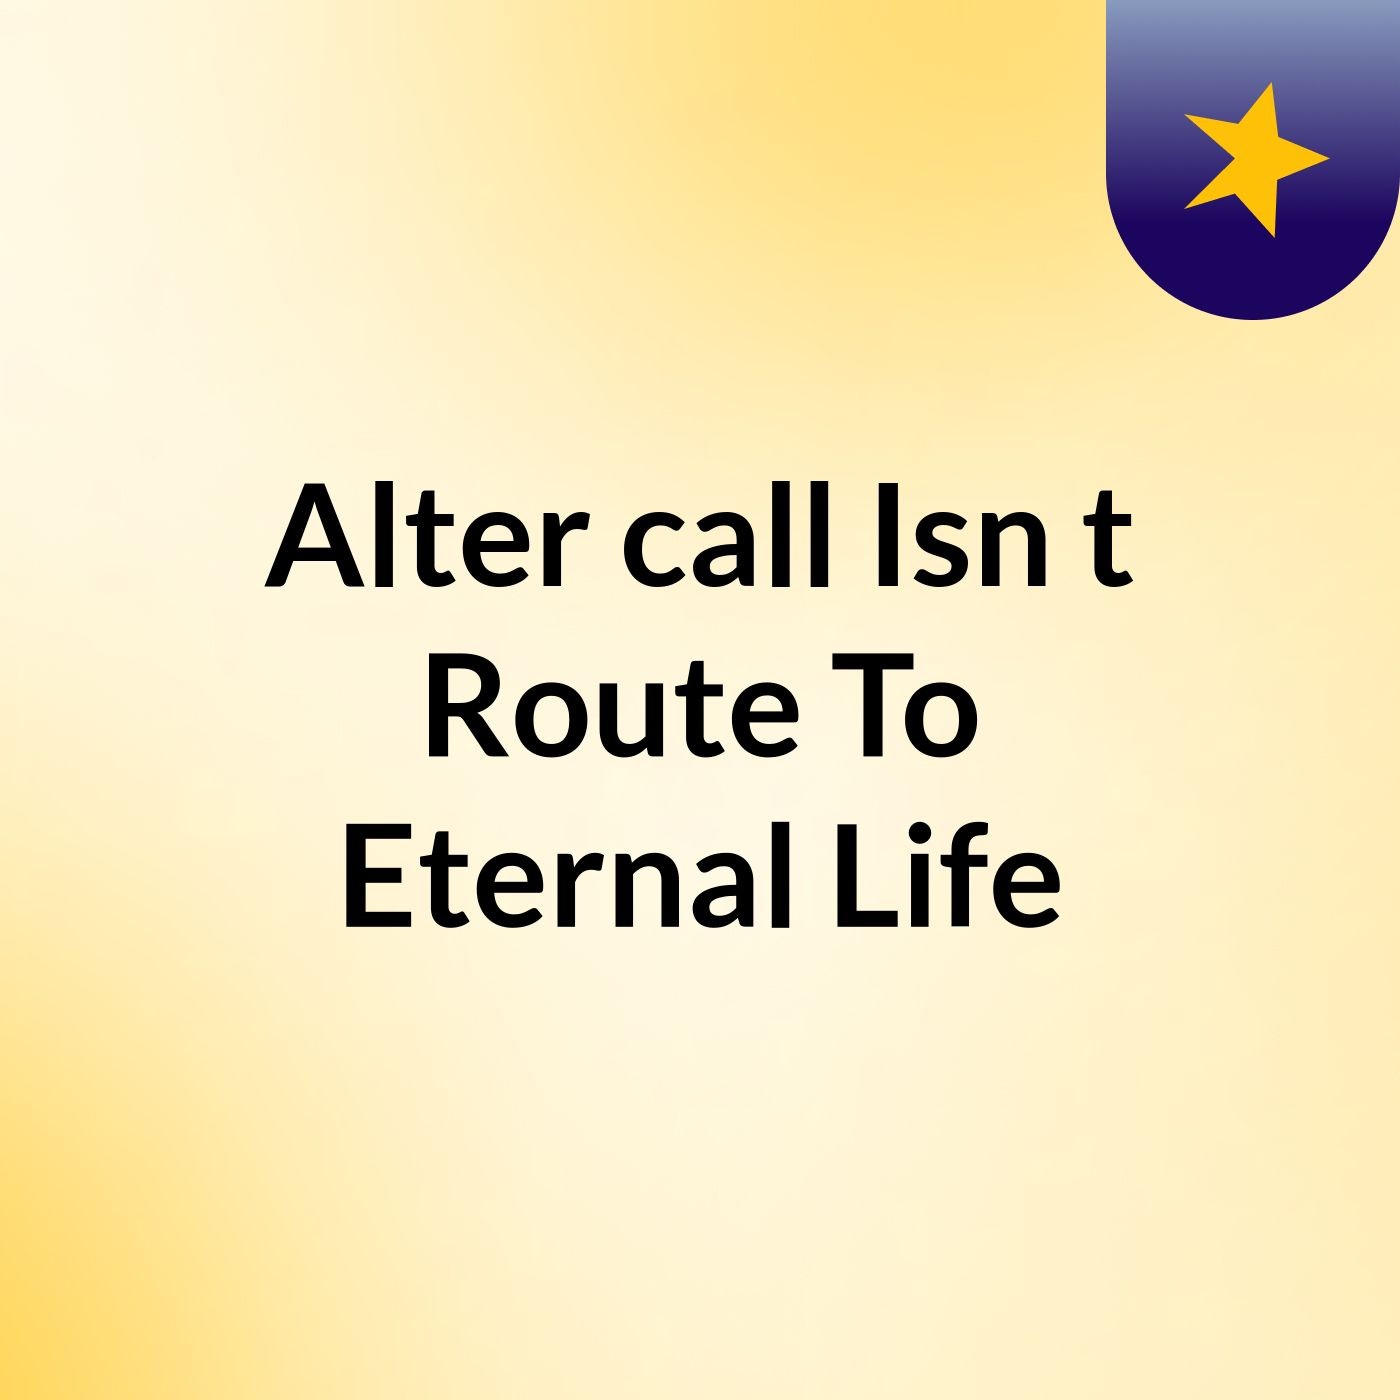 Alter call Isn't Route To Eternal Life